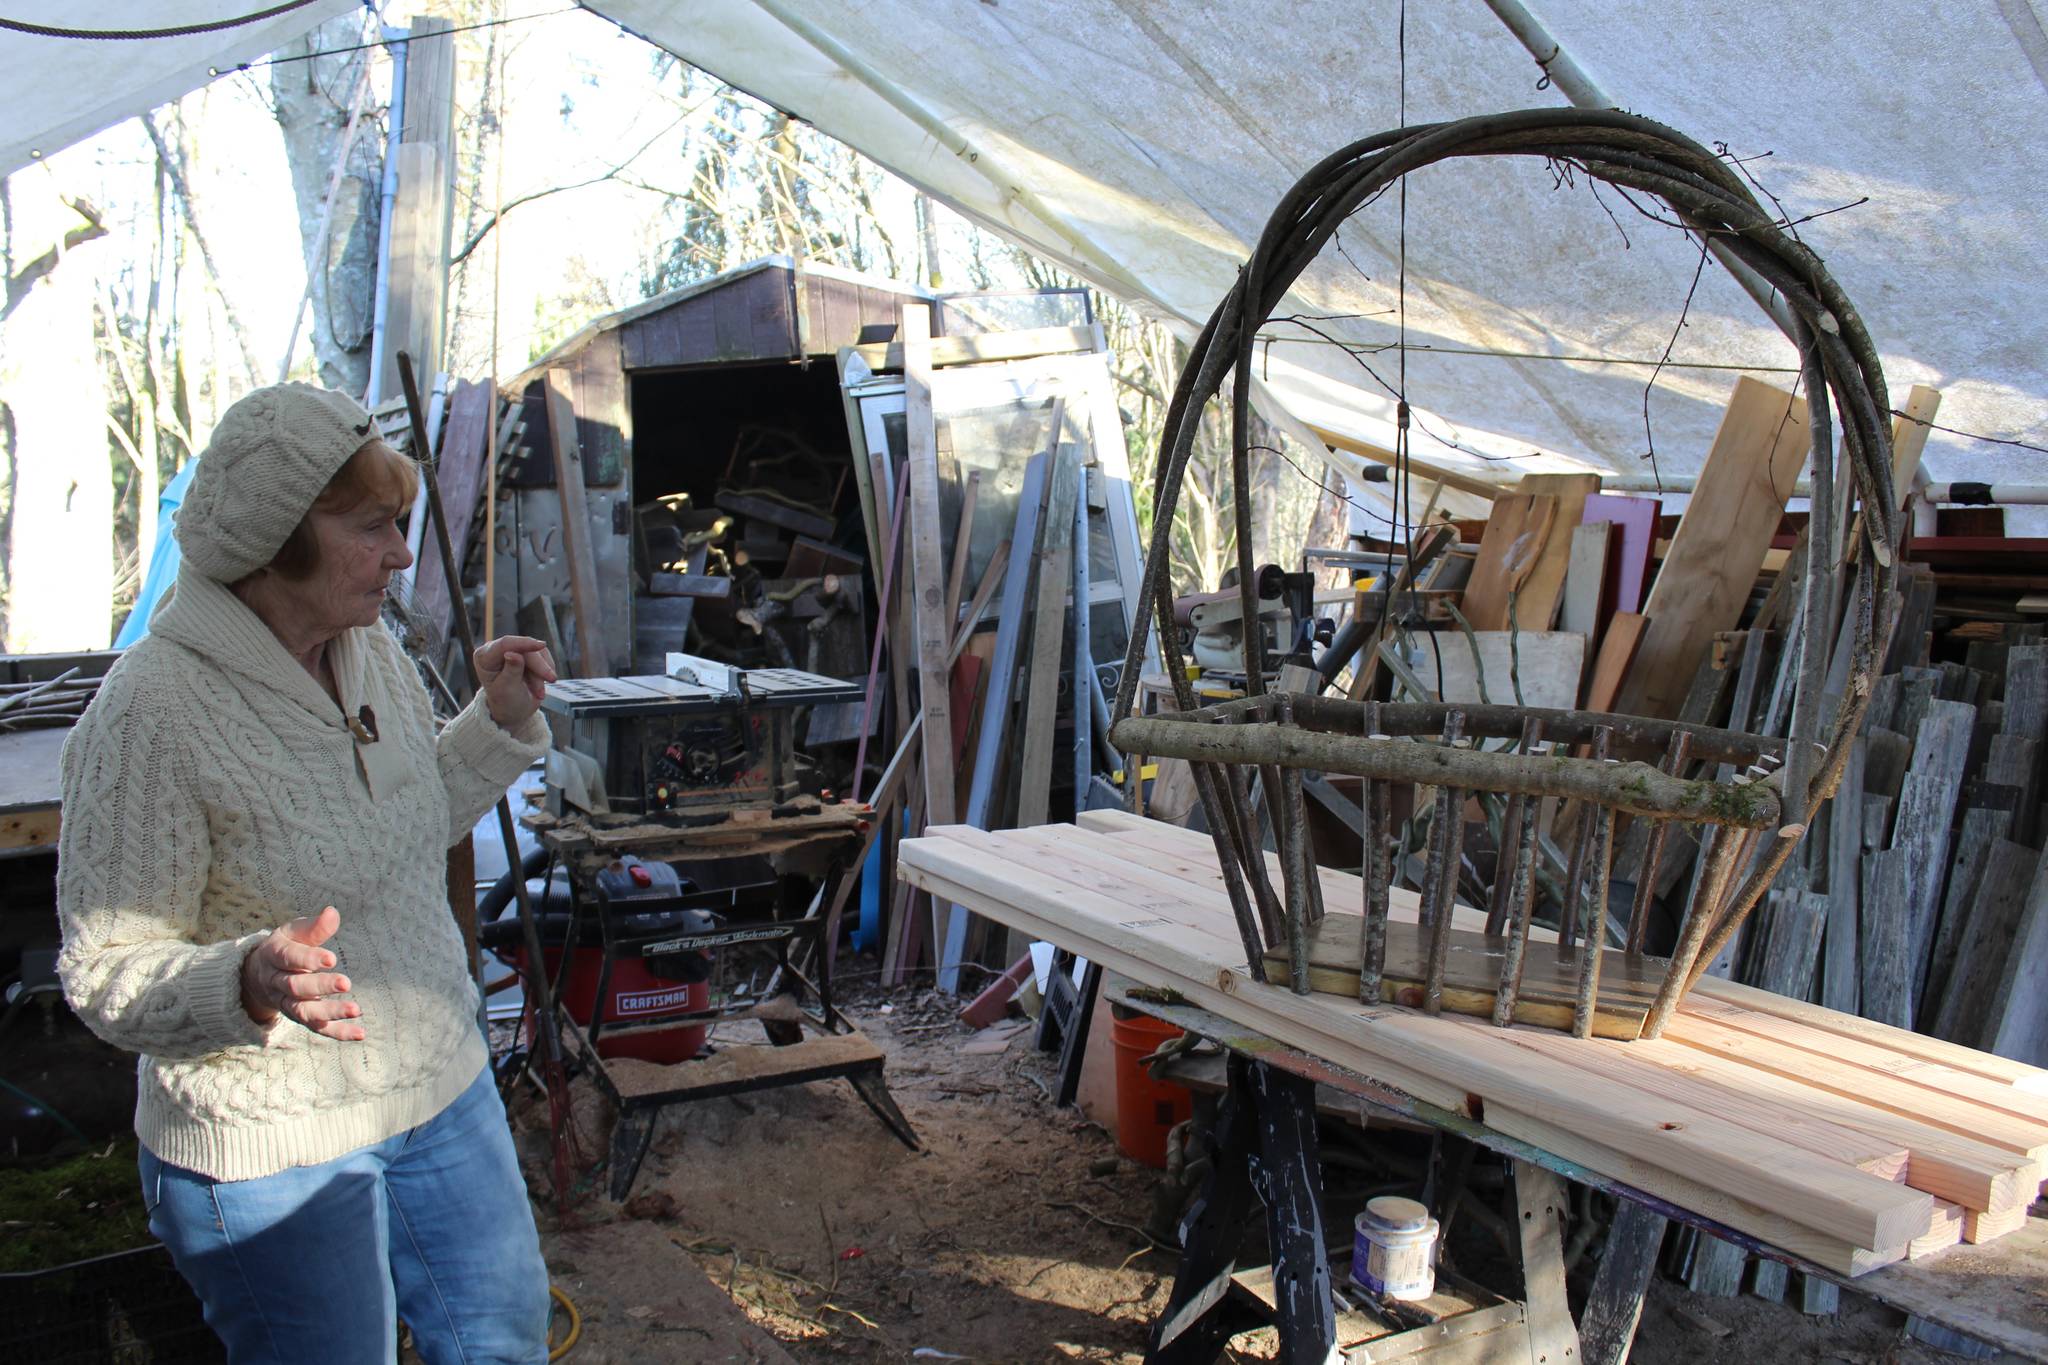 Vanca Lumsden sizes up a willow basket she and her husband made in their Freeland work studio. Photo by Patricia Guthrie/Whidbey News-Times